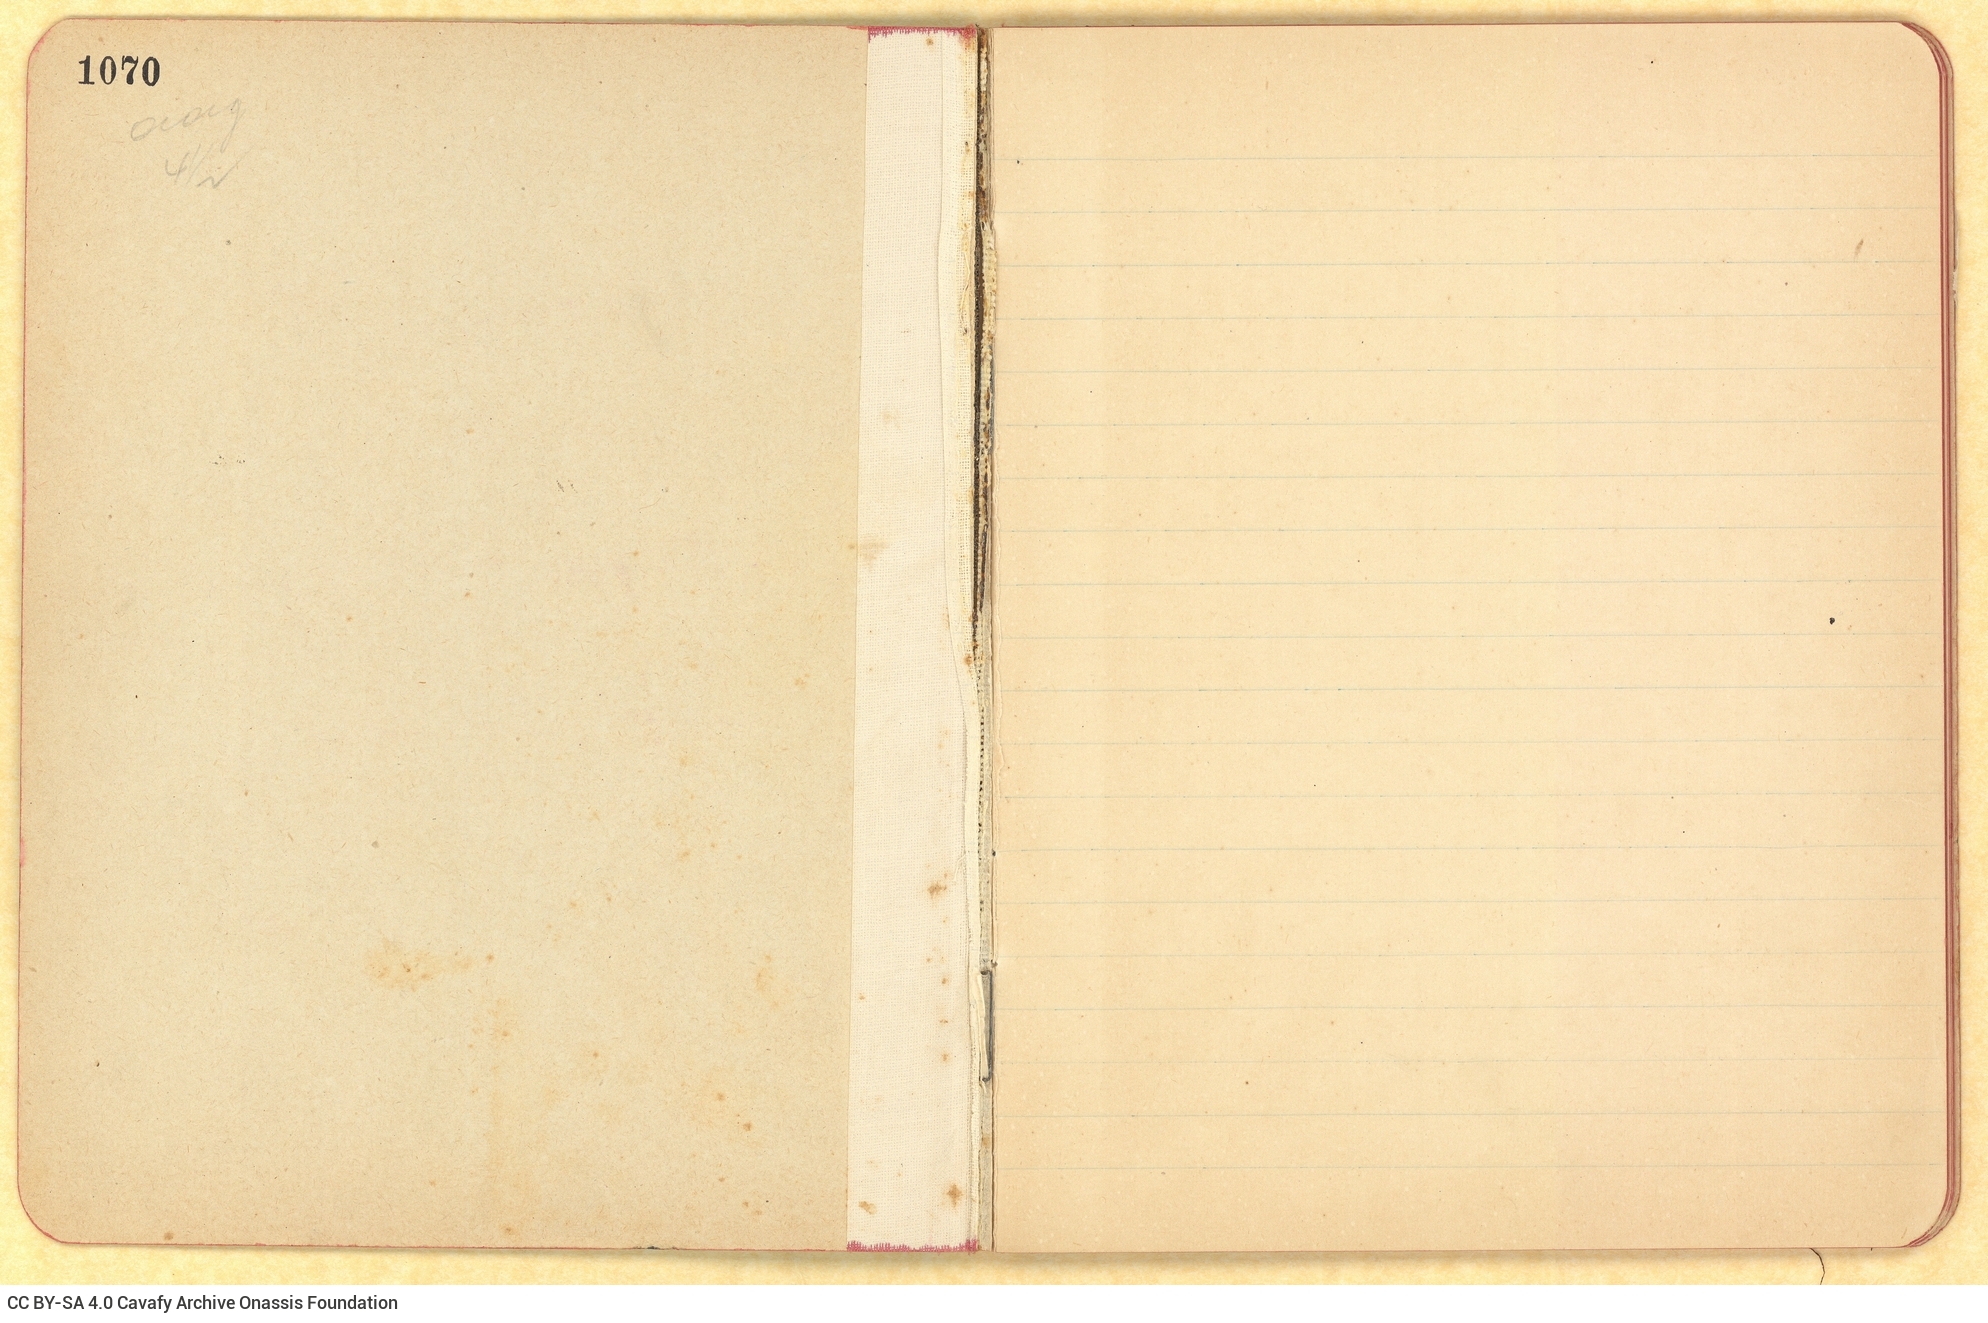 Notebook with handwritten notes on the last five sheets. The remaining pages are blank. Book titles are recorded, some of whi